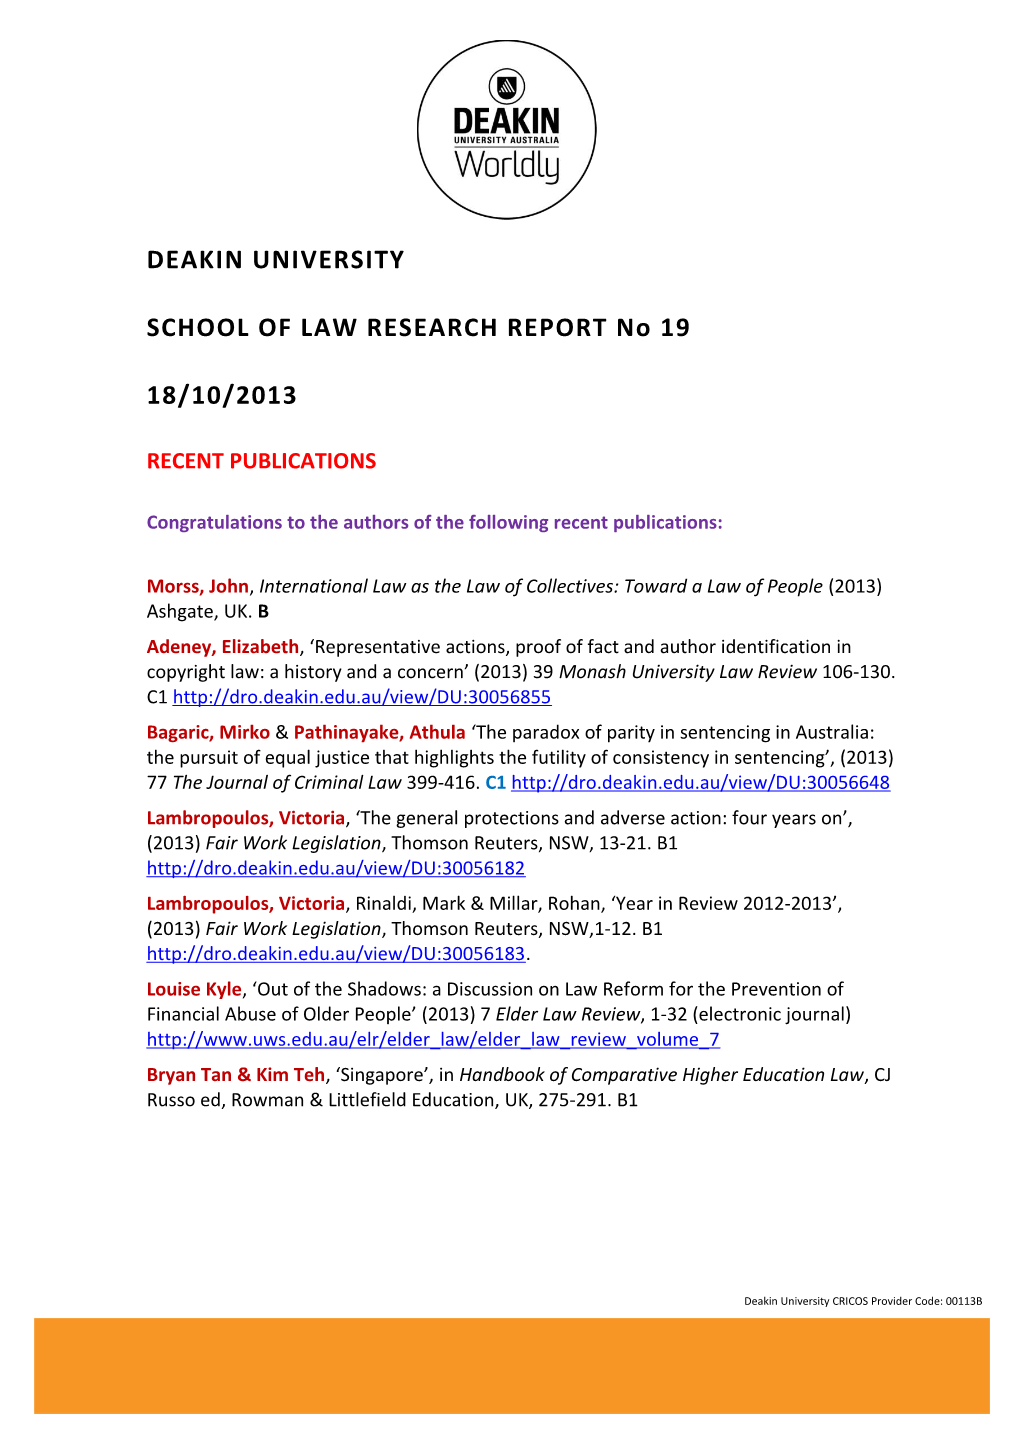 SCHOOL of LAW RESEARCH REPORT No 19